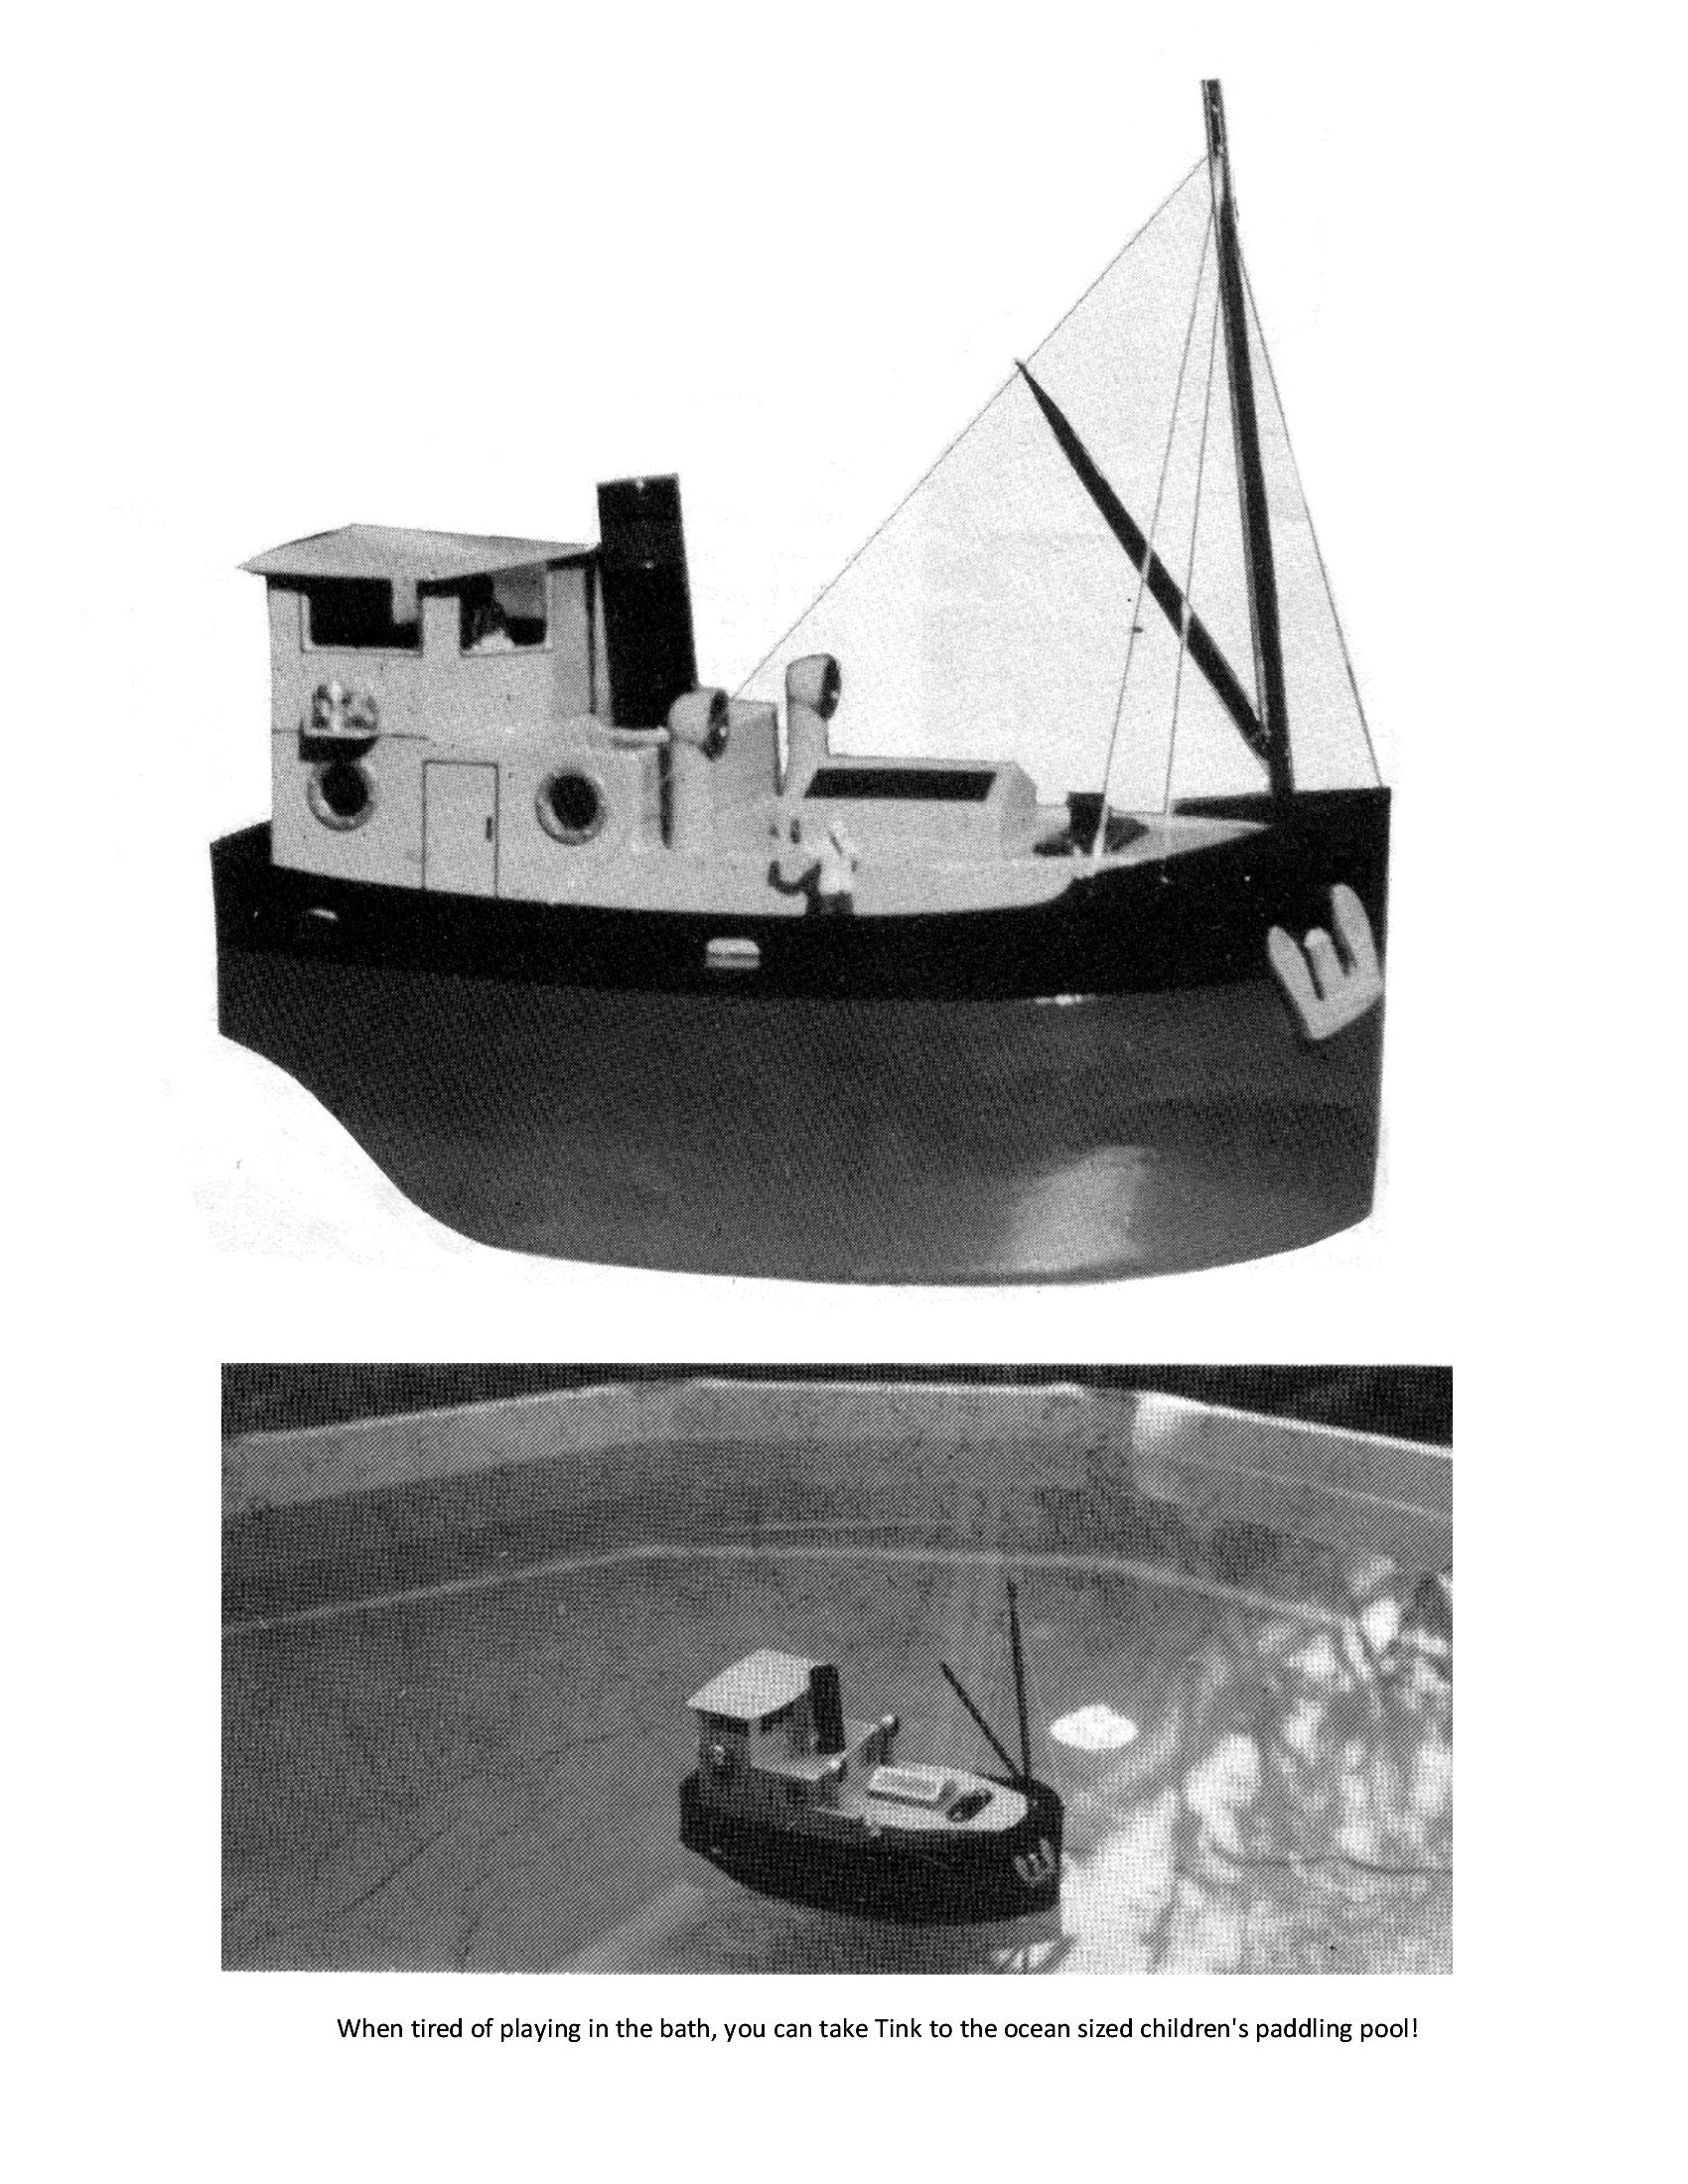 full size printed plan a 71/2 inch semi scale clyde puffer for one channel radio control.